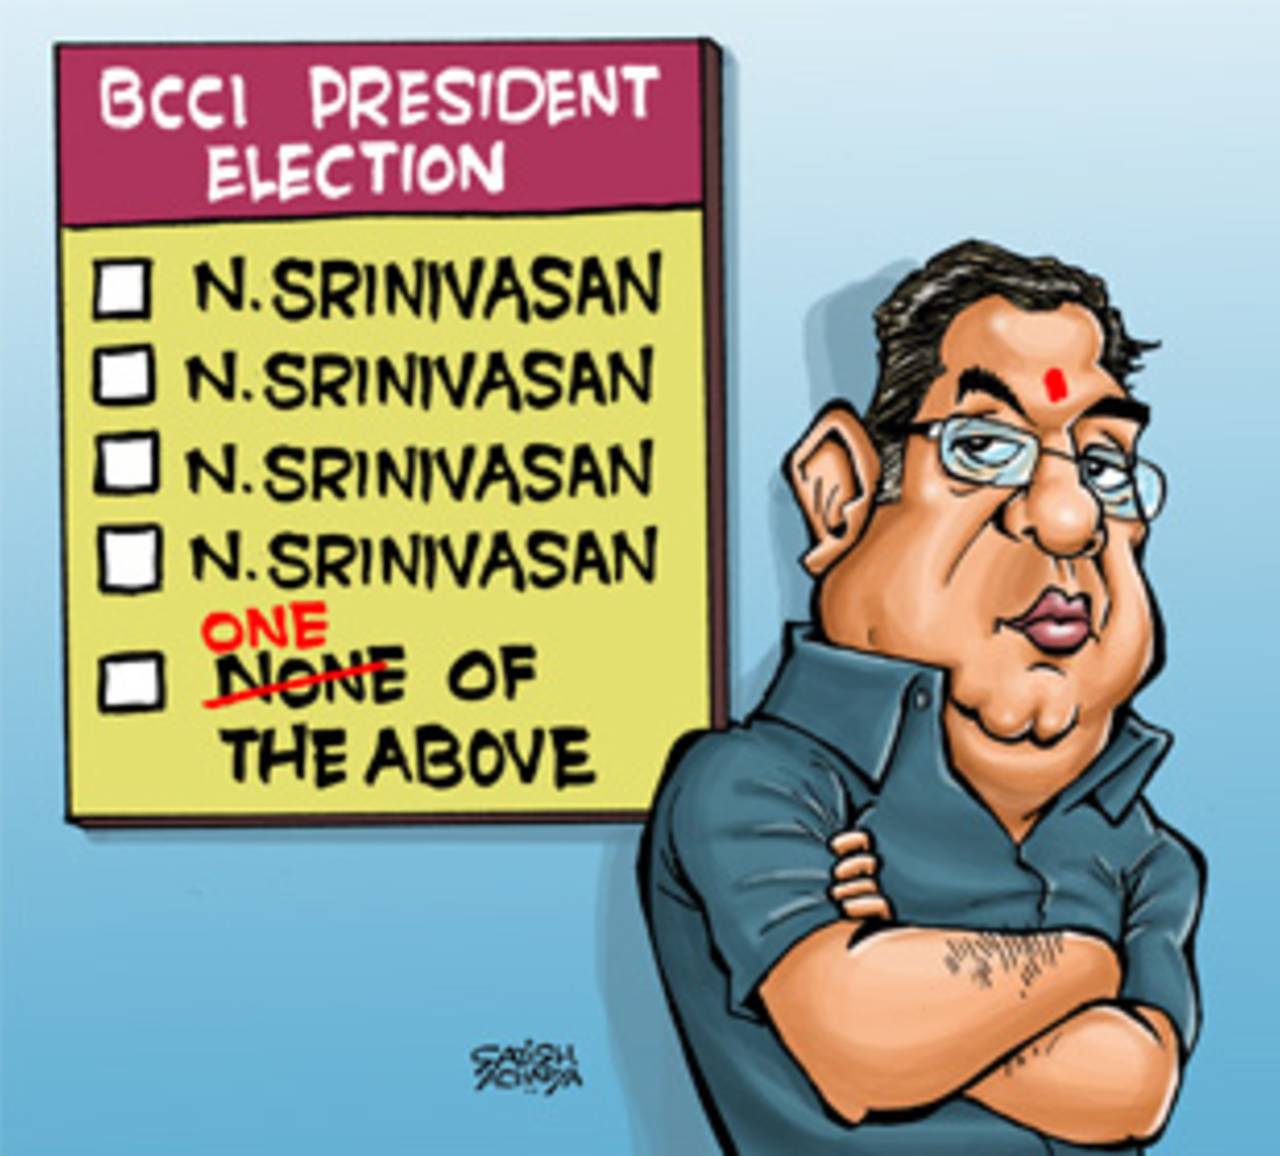 Despite a tumultuous year at the helm, Srinivasan faced no opposition when it came to the election